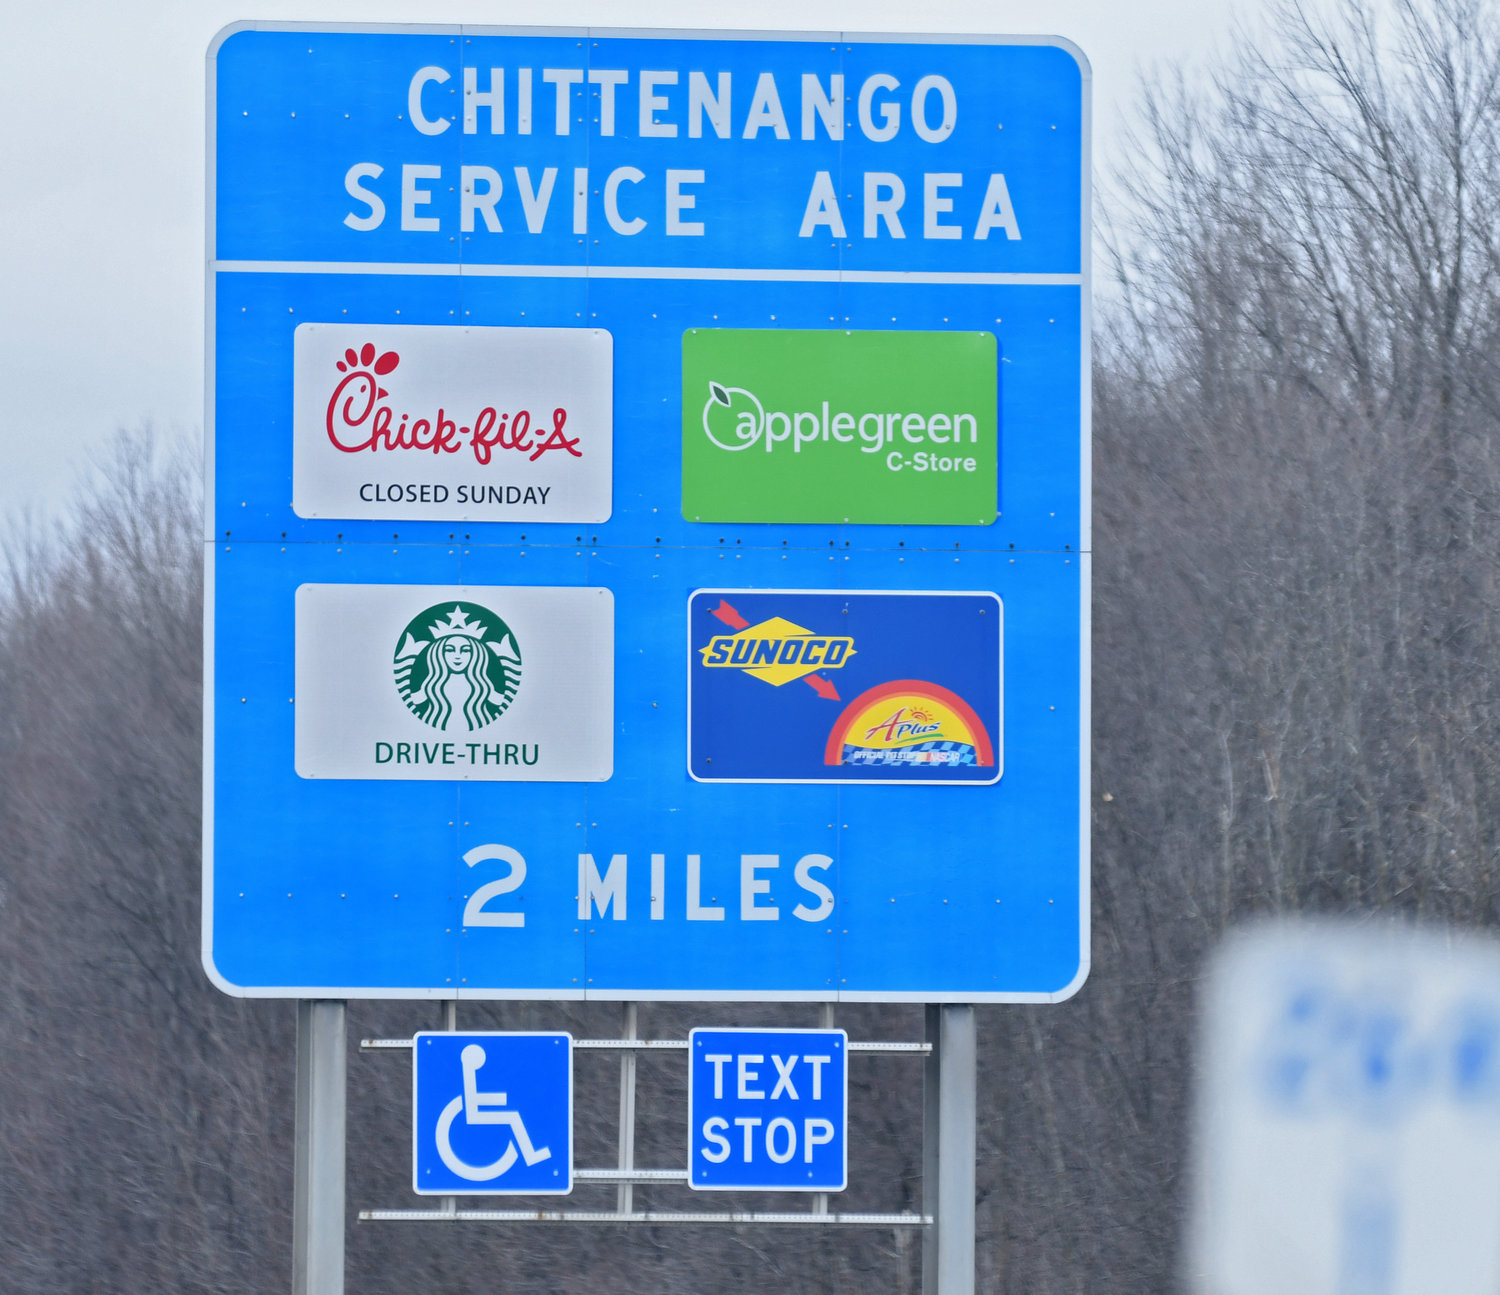 View of a sign going westbound on the NYS Thruway what is at the Chittenango Service Area Friday, December 30, 2022.